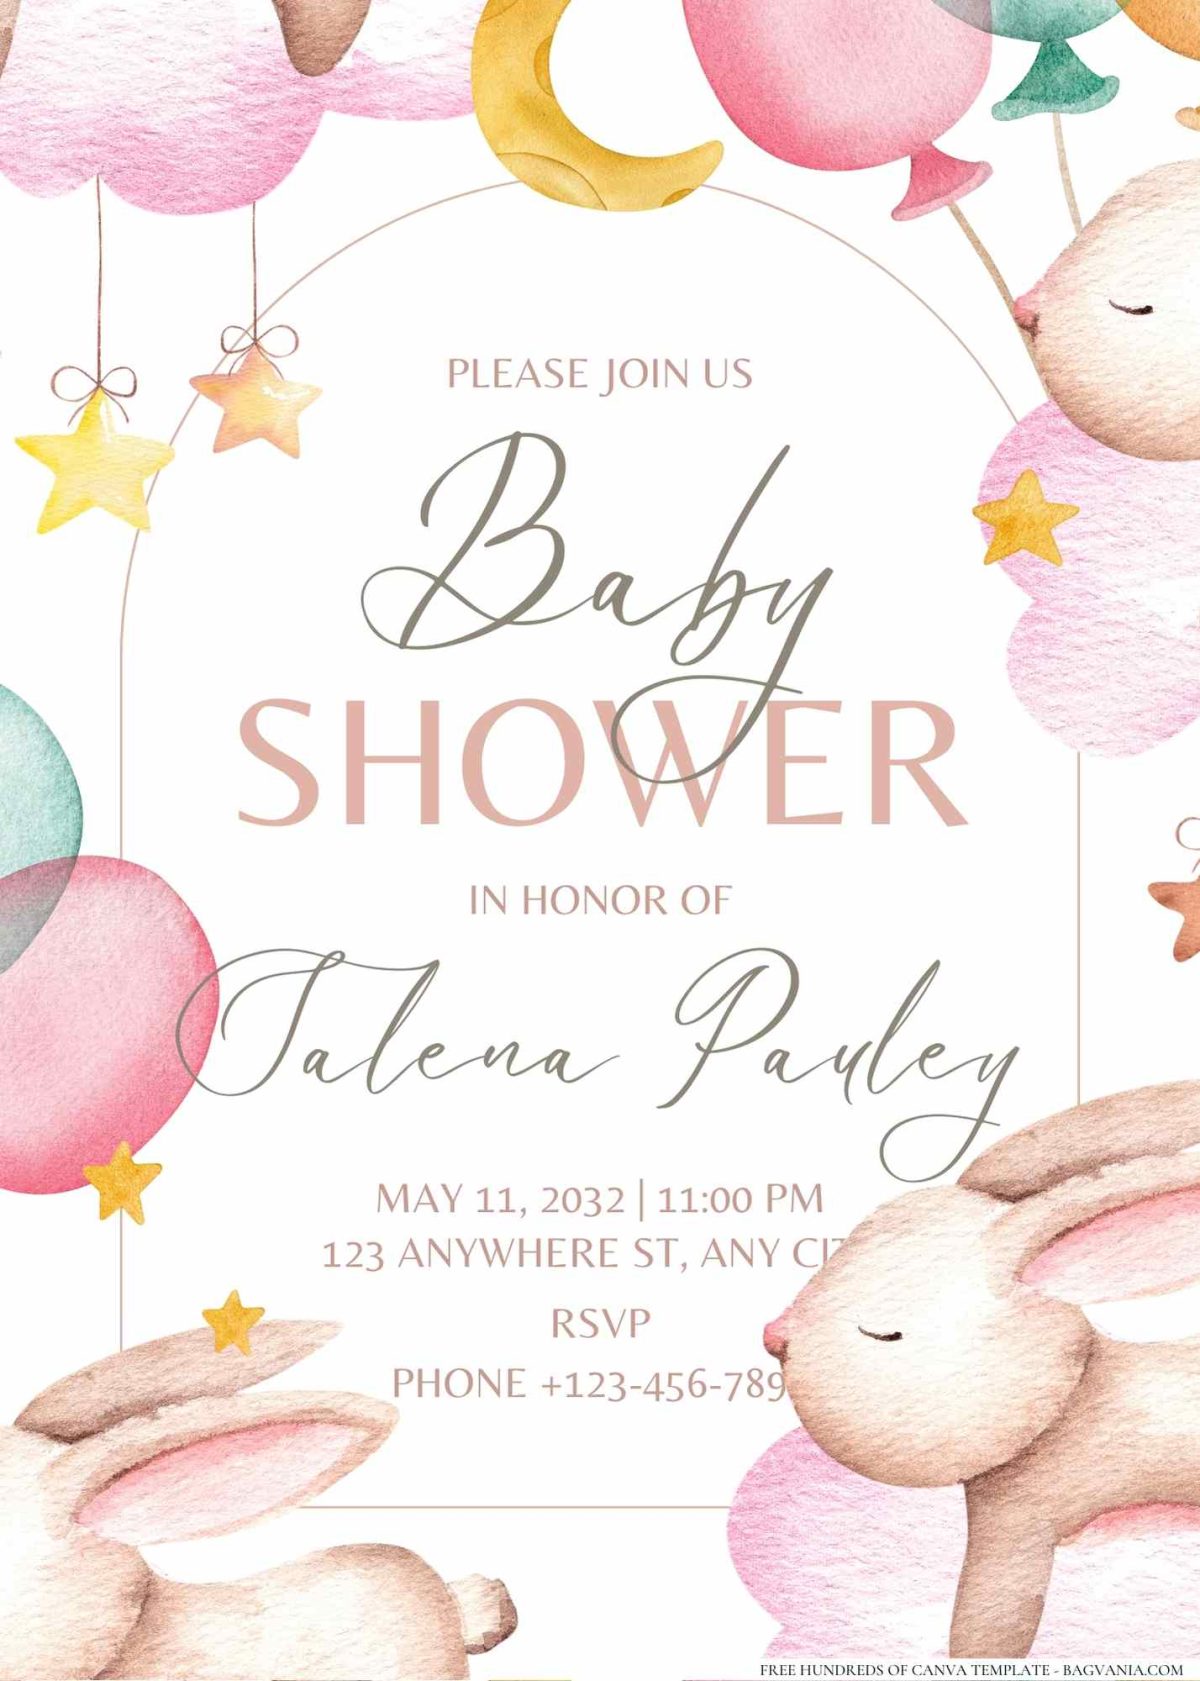 FREE Editable Rock a Bye Lullaby Baby Shower Invitation